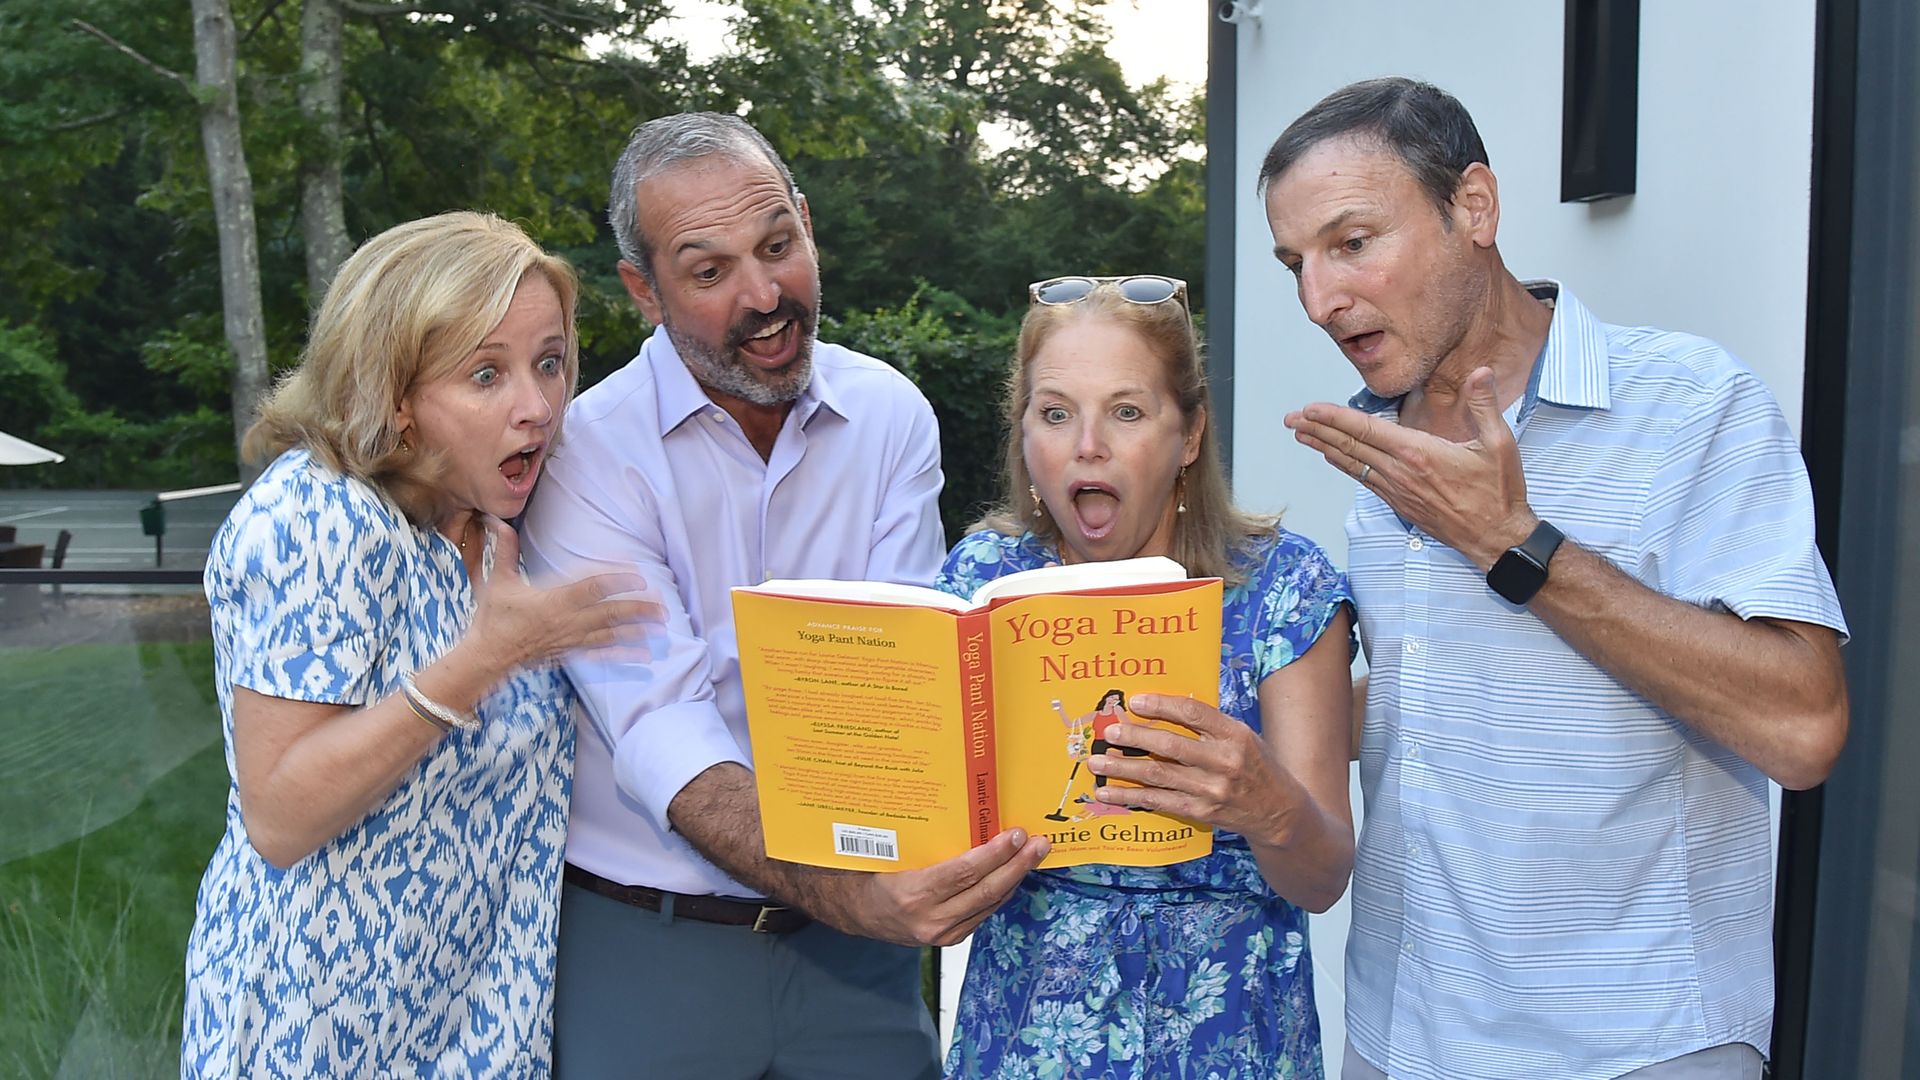 Katie Couric holds a book with a shocked expression on her face.